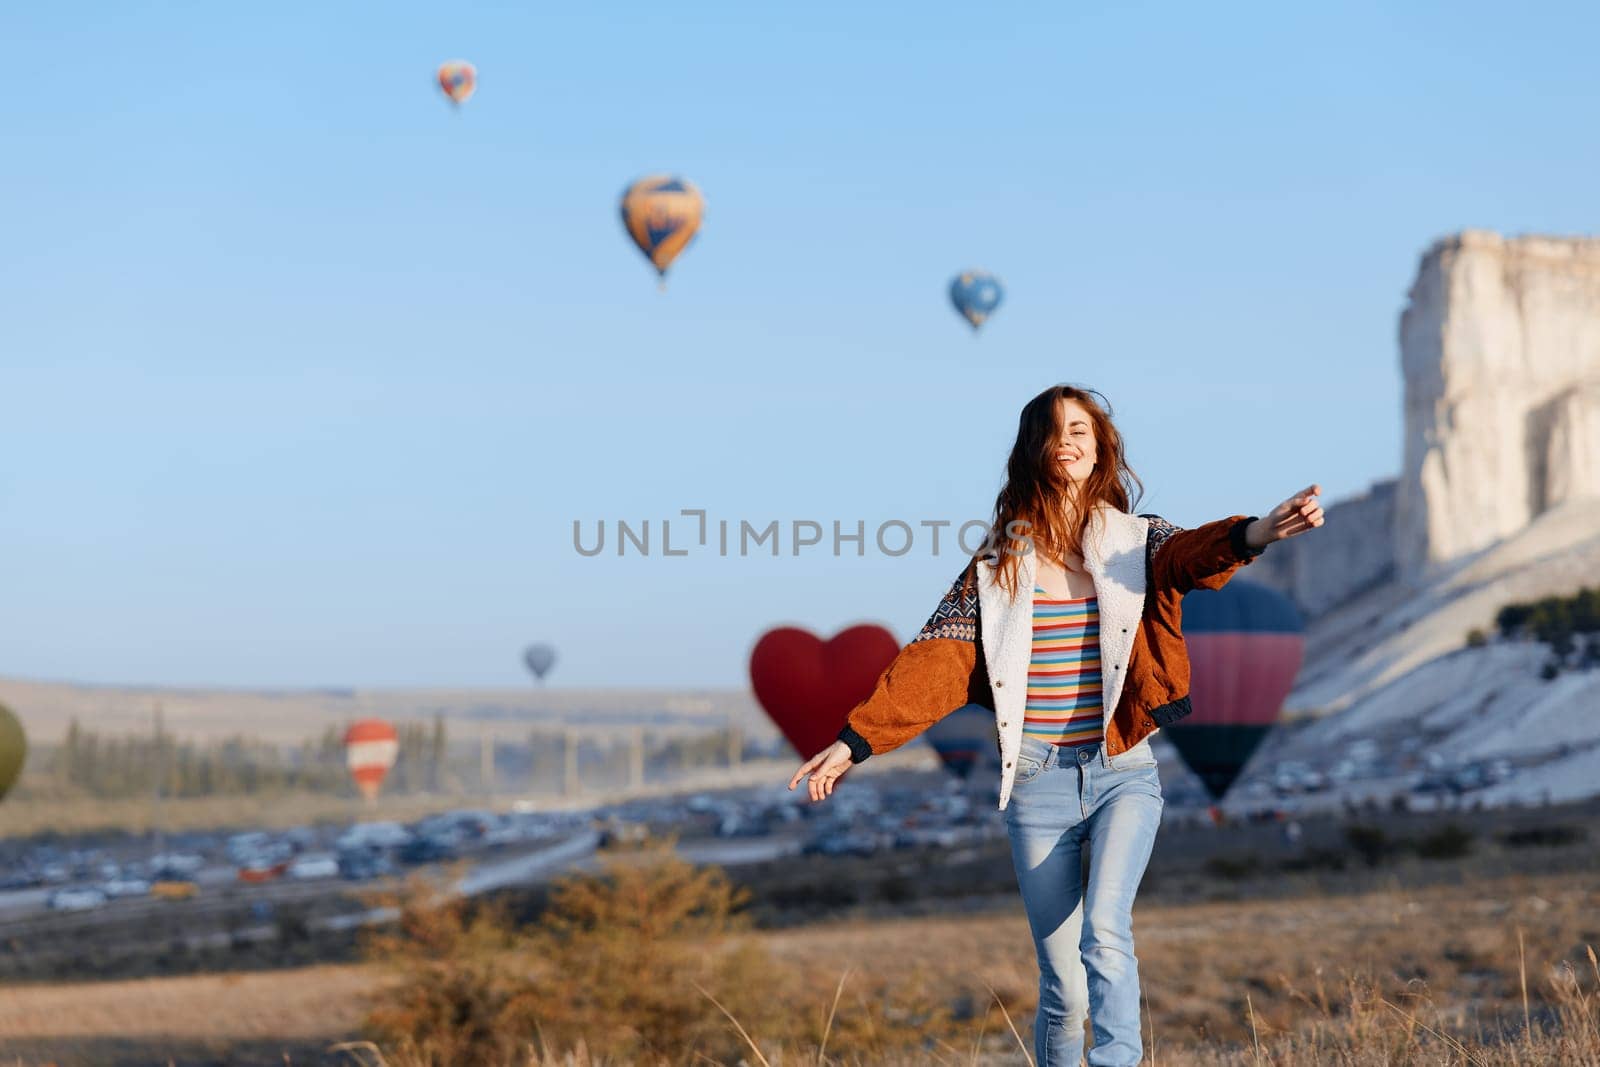 Woman admiring colorful hot air balloons against majestic mountain backdrop